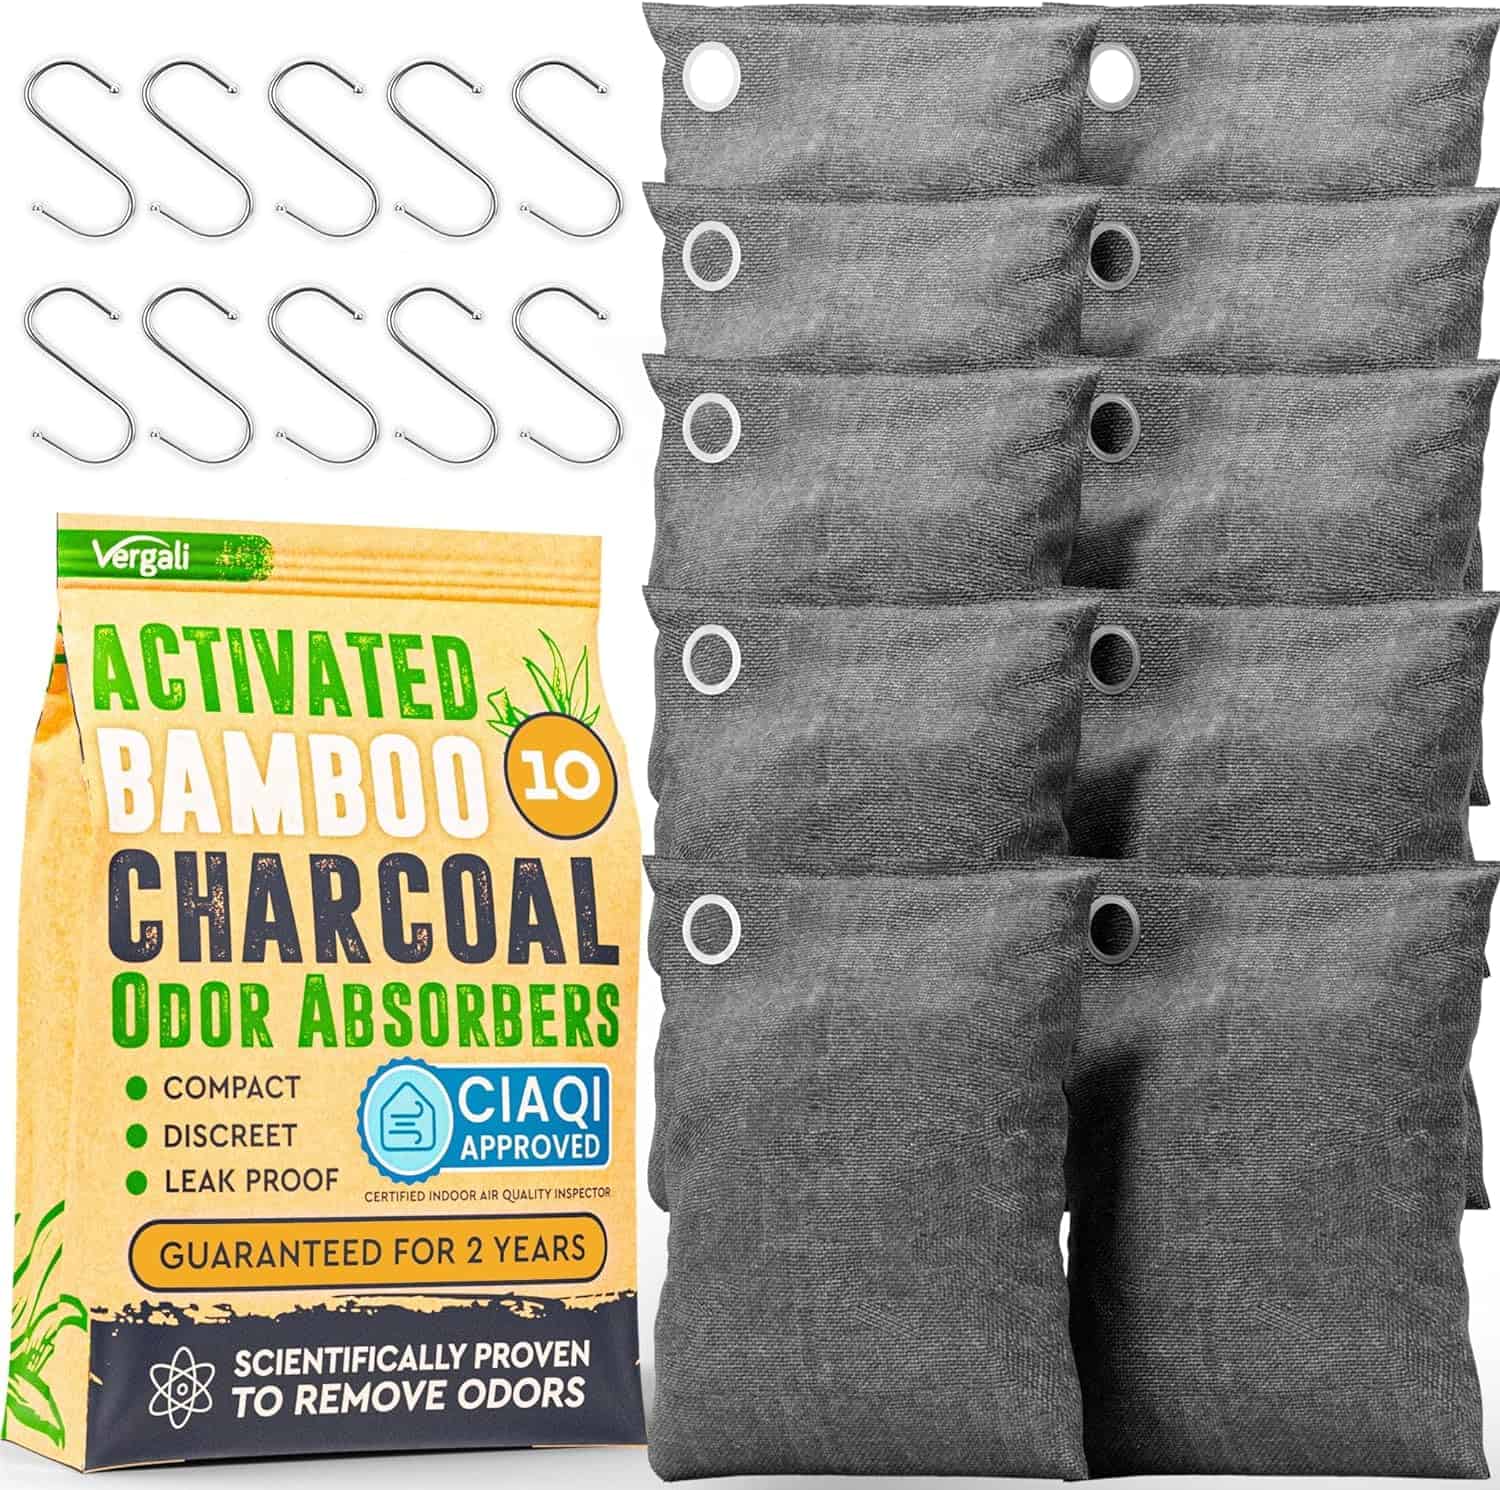 Activated Charcoal Odor Absorber 10x3.5oz w Hooks. Nature Fresh Bamboo Charcoal Air Purifying Bag Home Closet Air Freshener Deodorizer Odor Eliminator